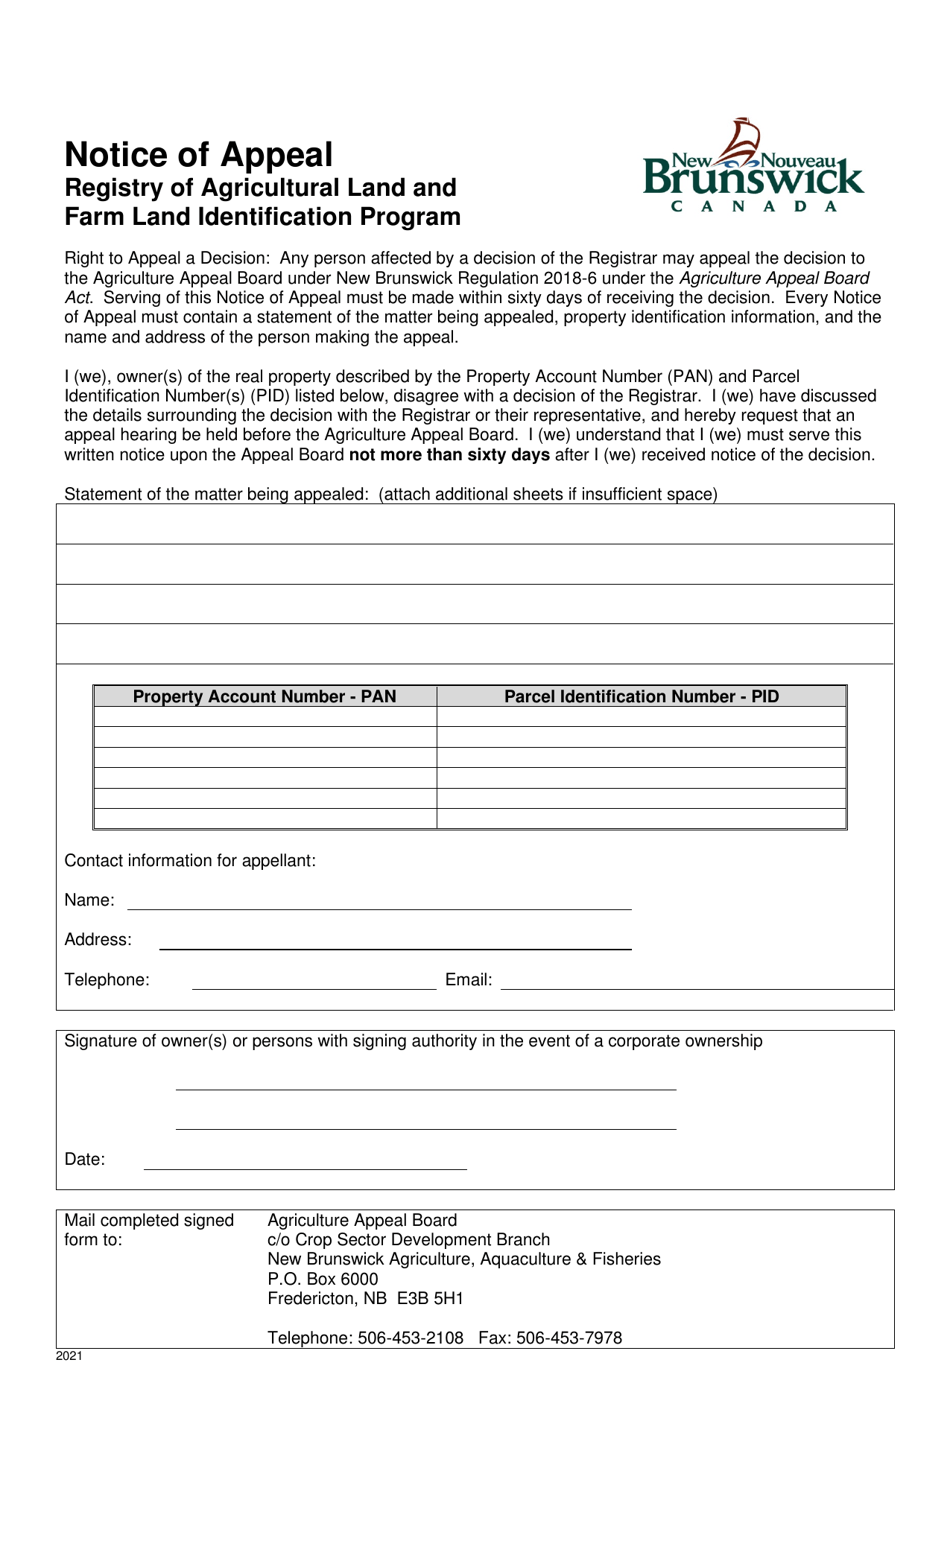 Notice of Appeal - Registry of Agricultural Land and Farm Land Identification Program - New Brunswick, Canada, Page 1